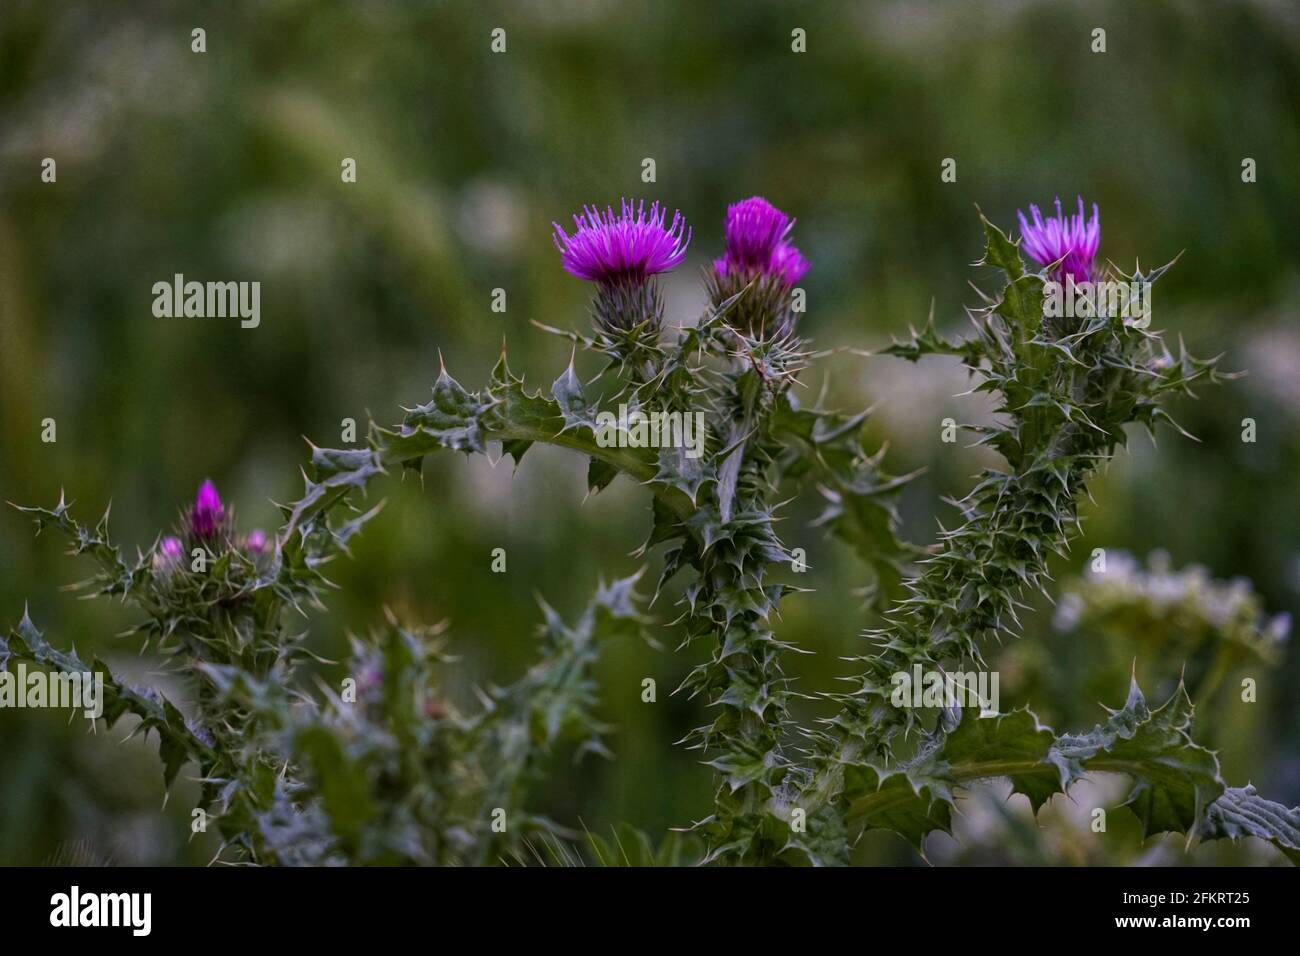 Closeup shot of the Italian thistle flowers on a blurred background Stock Photo